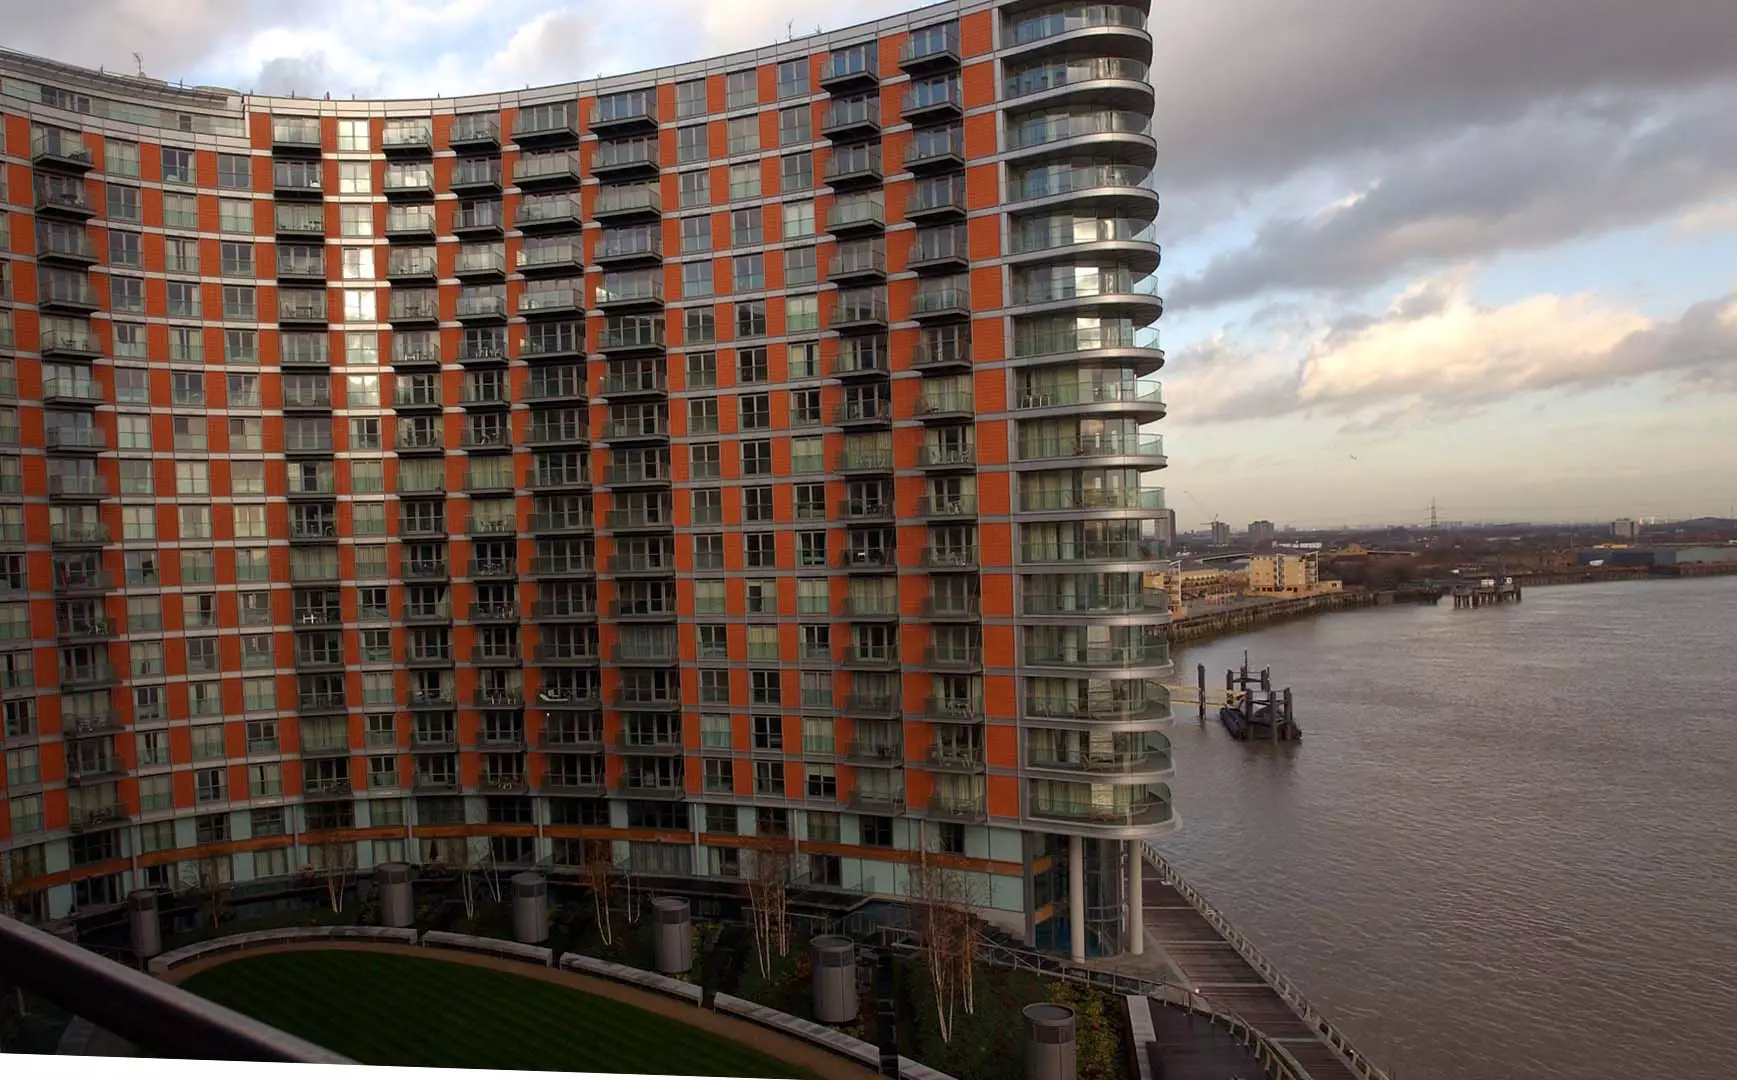 New Providence Wharf set on fire at the start of May (